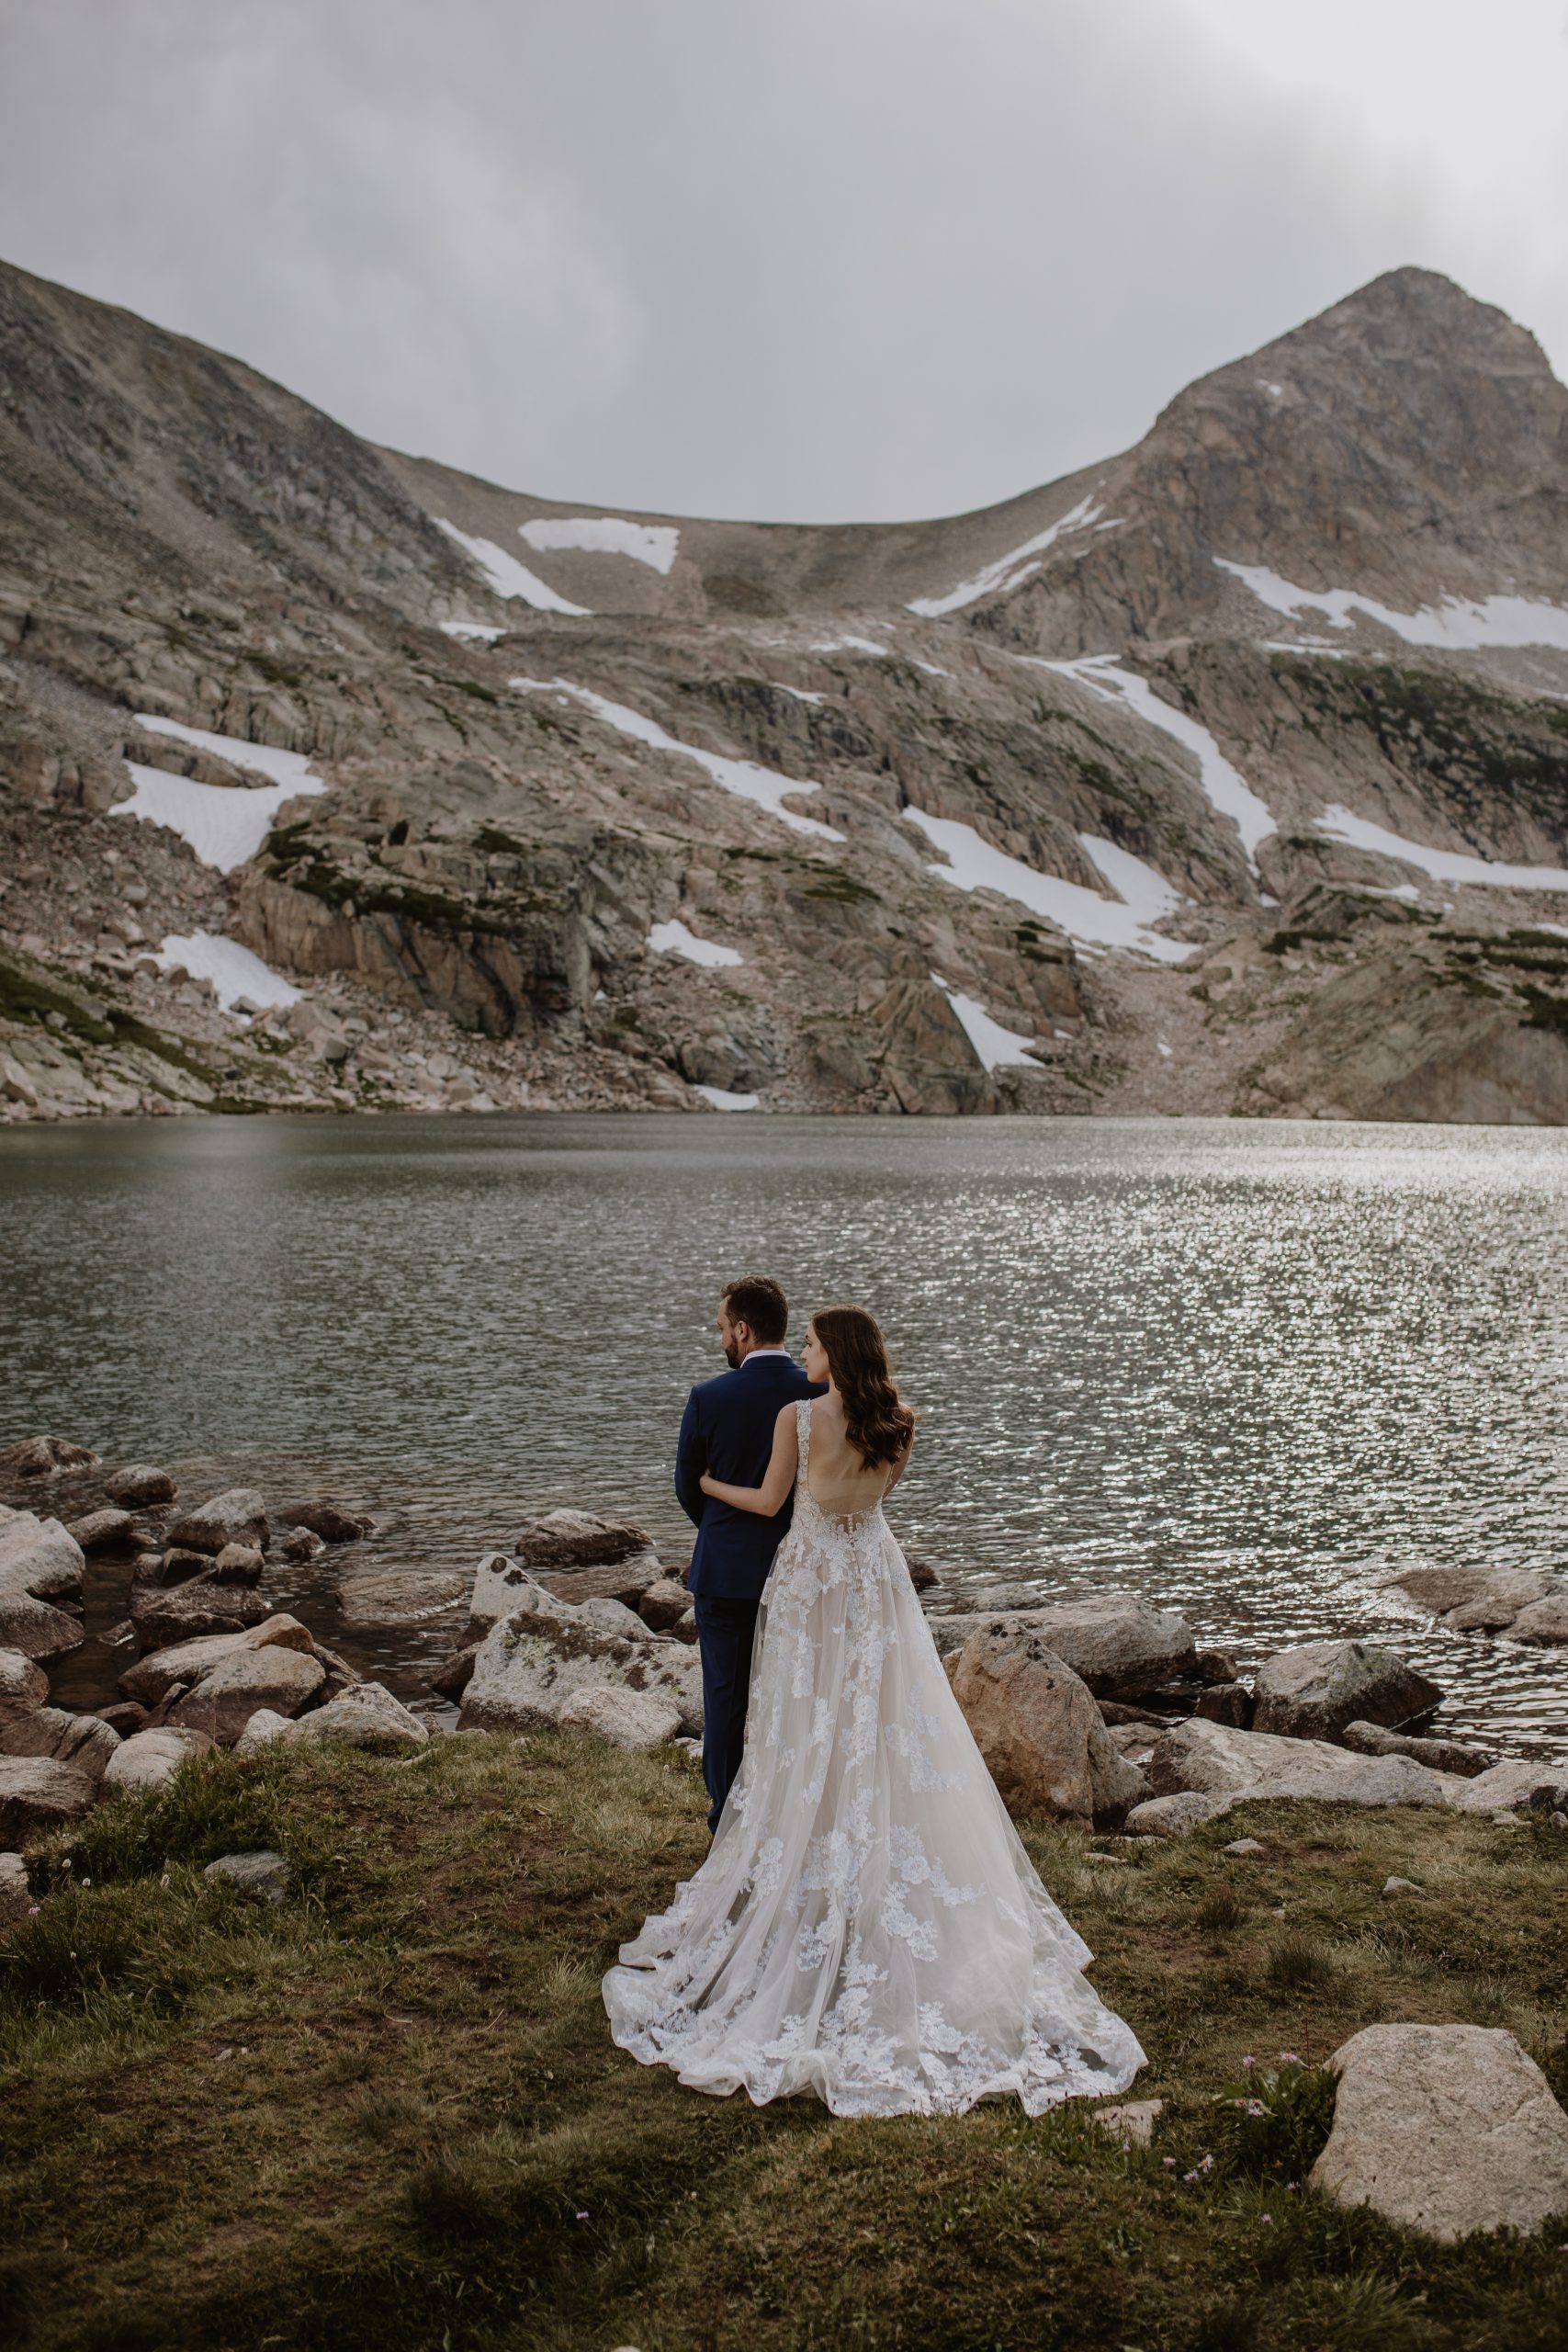 Couple in wedding attire posing in front of Colorado Mountains